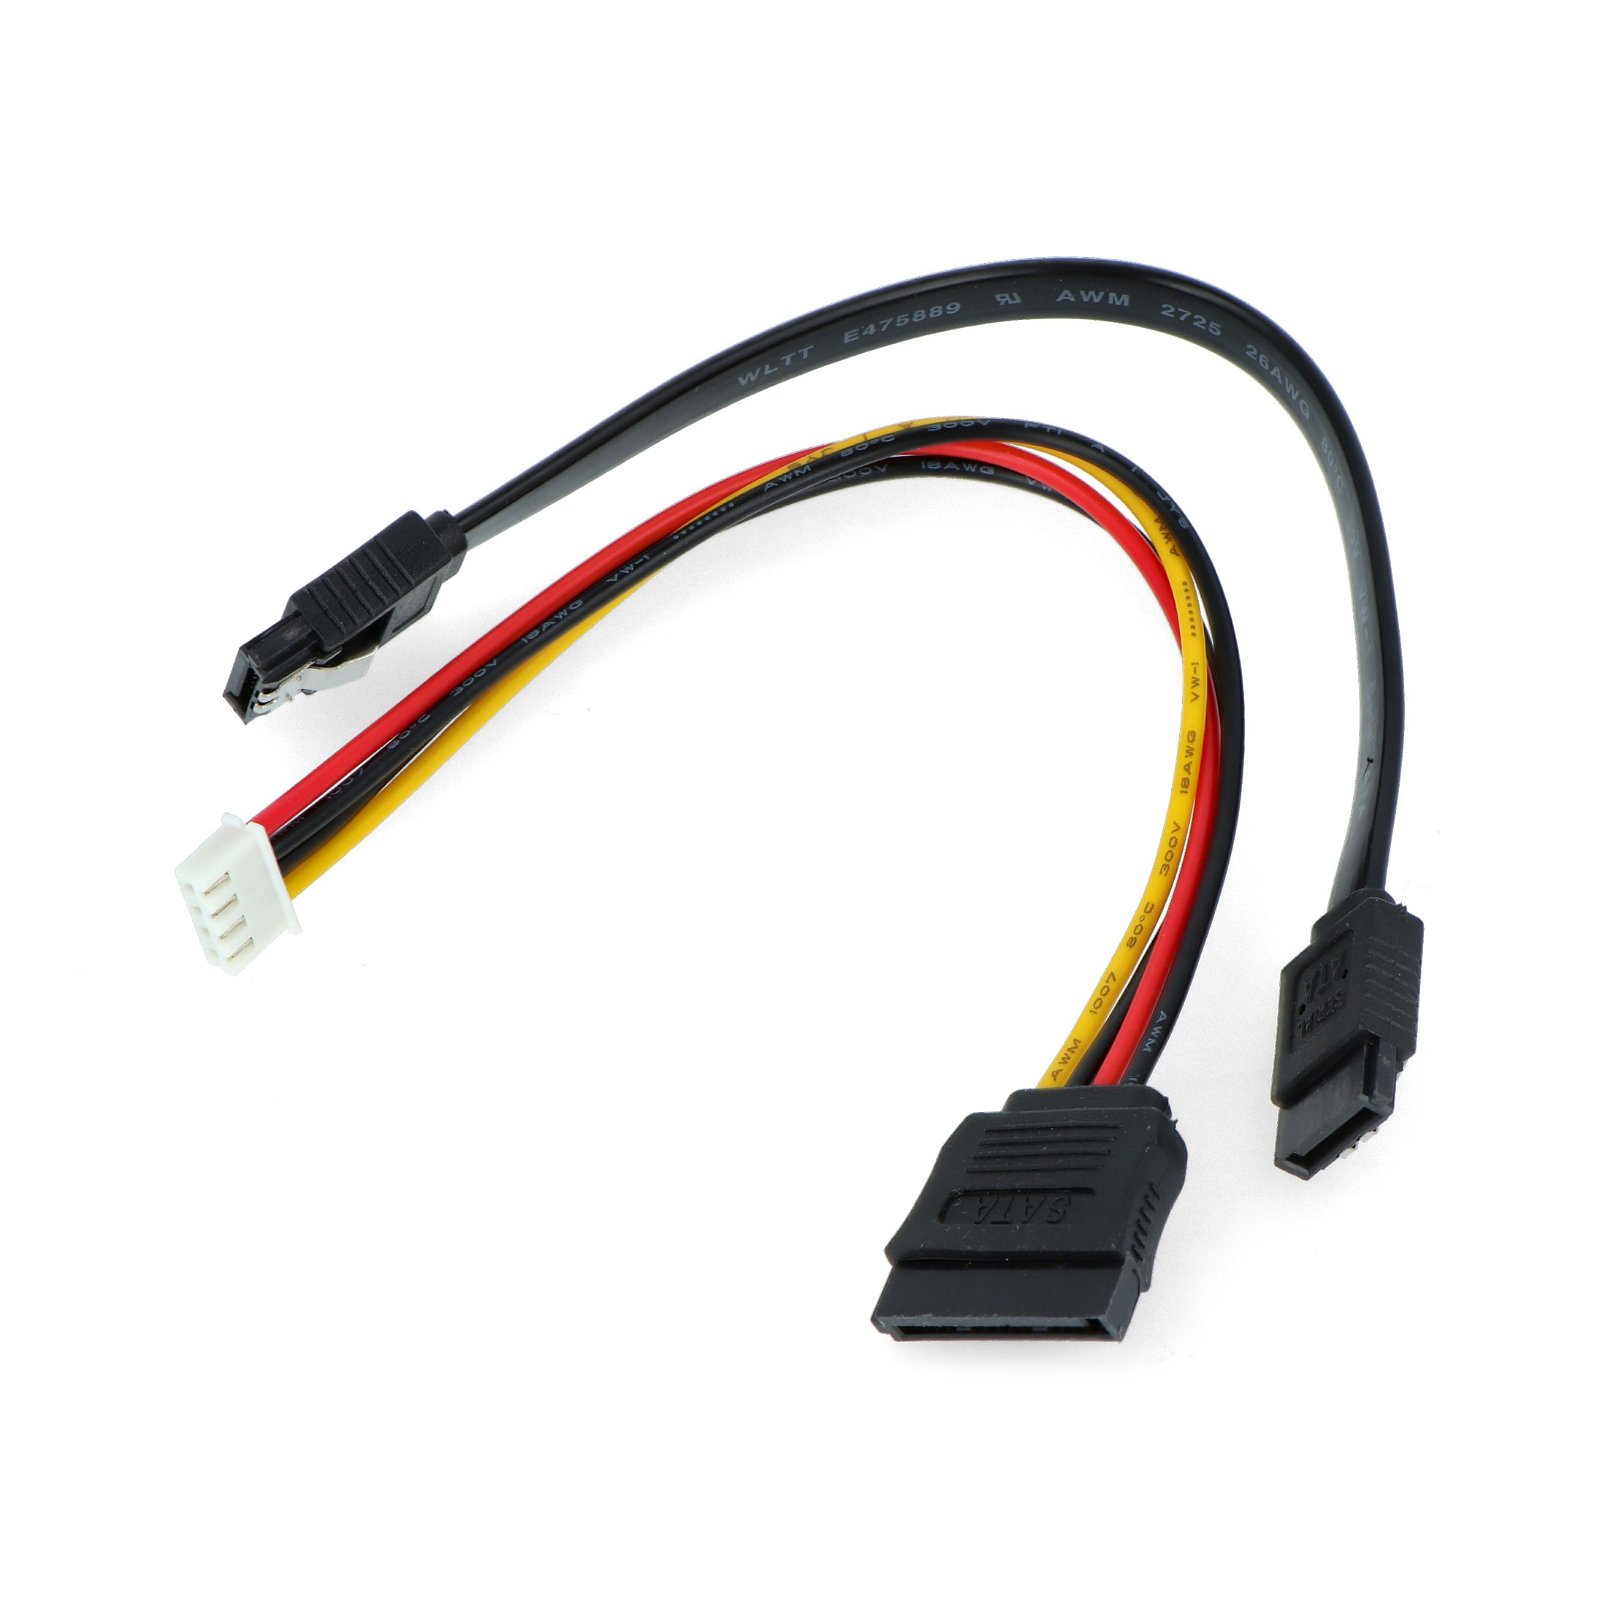 SATA cable and power cord for Odroid H2